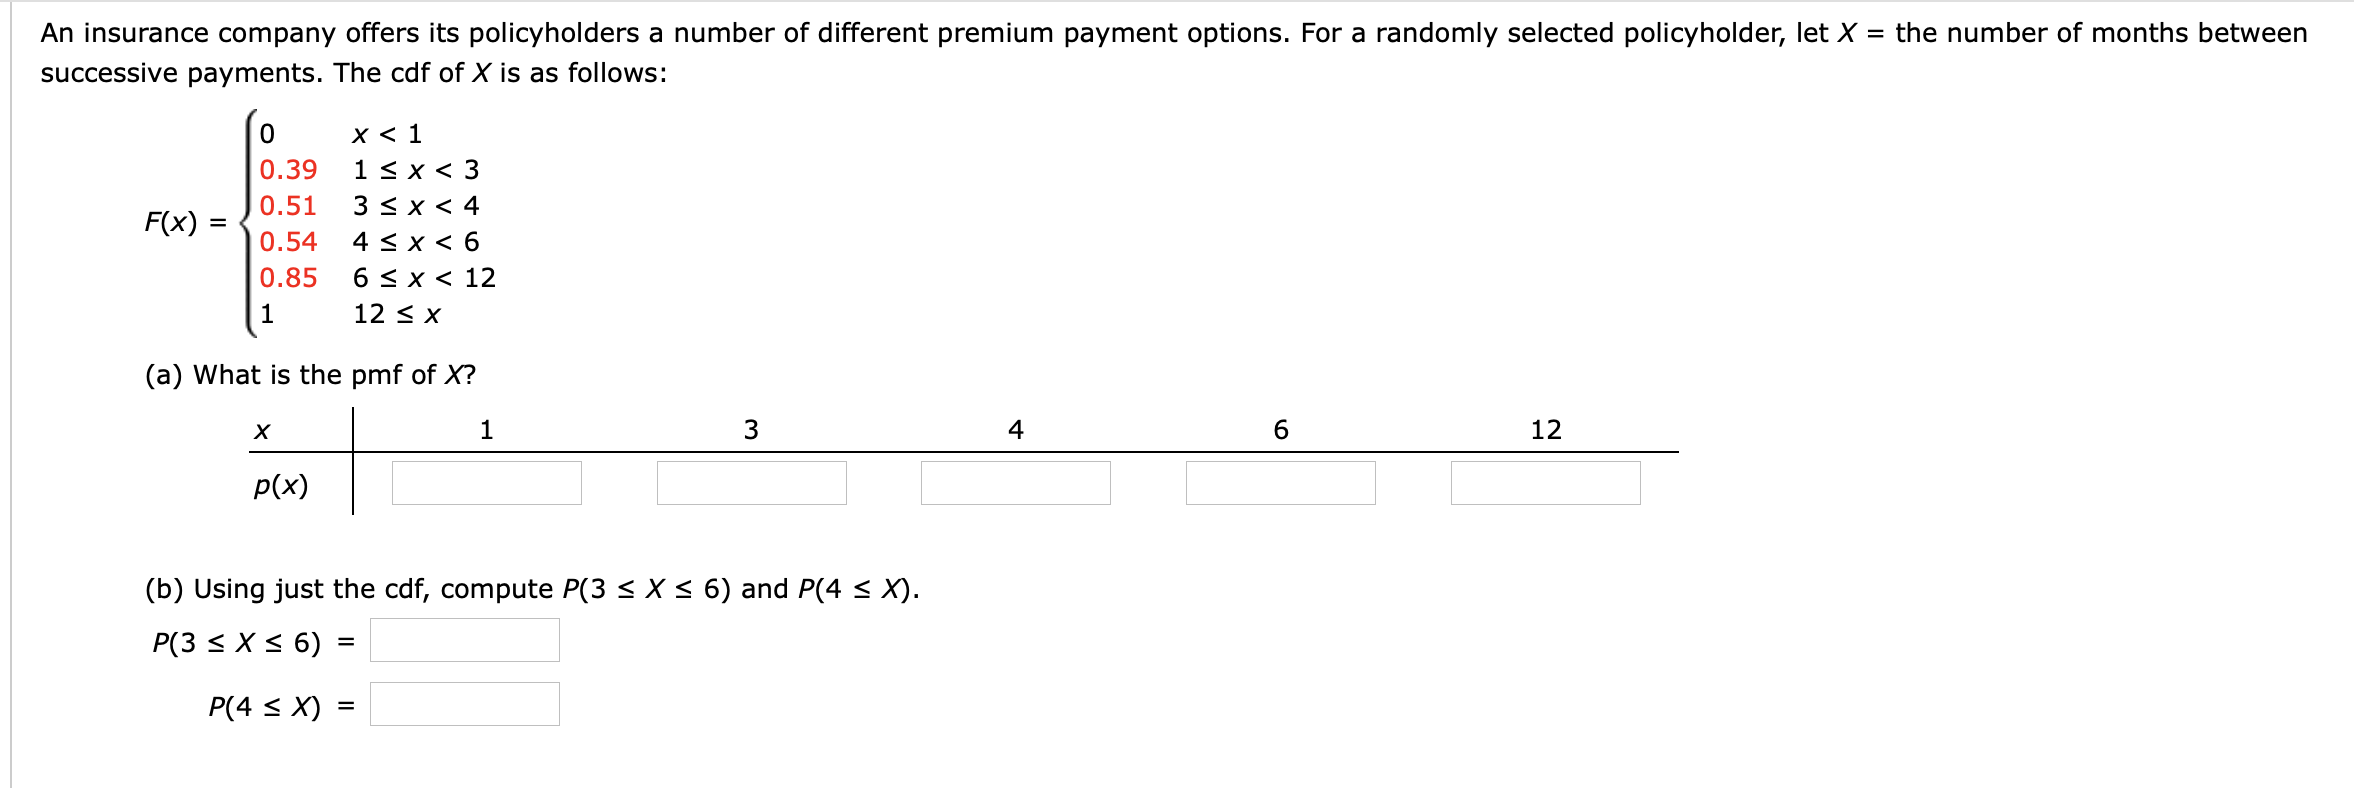 An insurance company offers its policyholders a number of different premium payment options. For a randomly selected policyholder, let X = the number of months between
successive payments. The cdf of X is as follows:
x < 1
1 < x < 3
3 < x < 4
4 < x < 6
6 < x < 12
0.39
0.51
F(x) :
0.54
0.85
1
12 < X
(a) What is the pmf of X?
1
3
4
12
p(x)
(b) Using just the cdf, compute P(3 < X < 6) and P(4 < X).
P(3 < X < 6) =
P(4 < X) =
